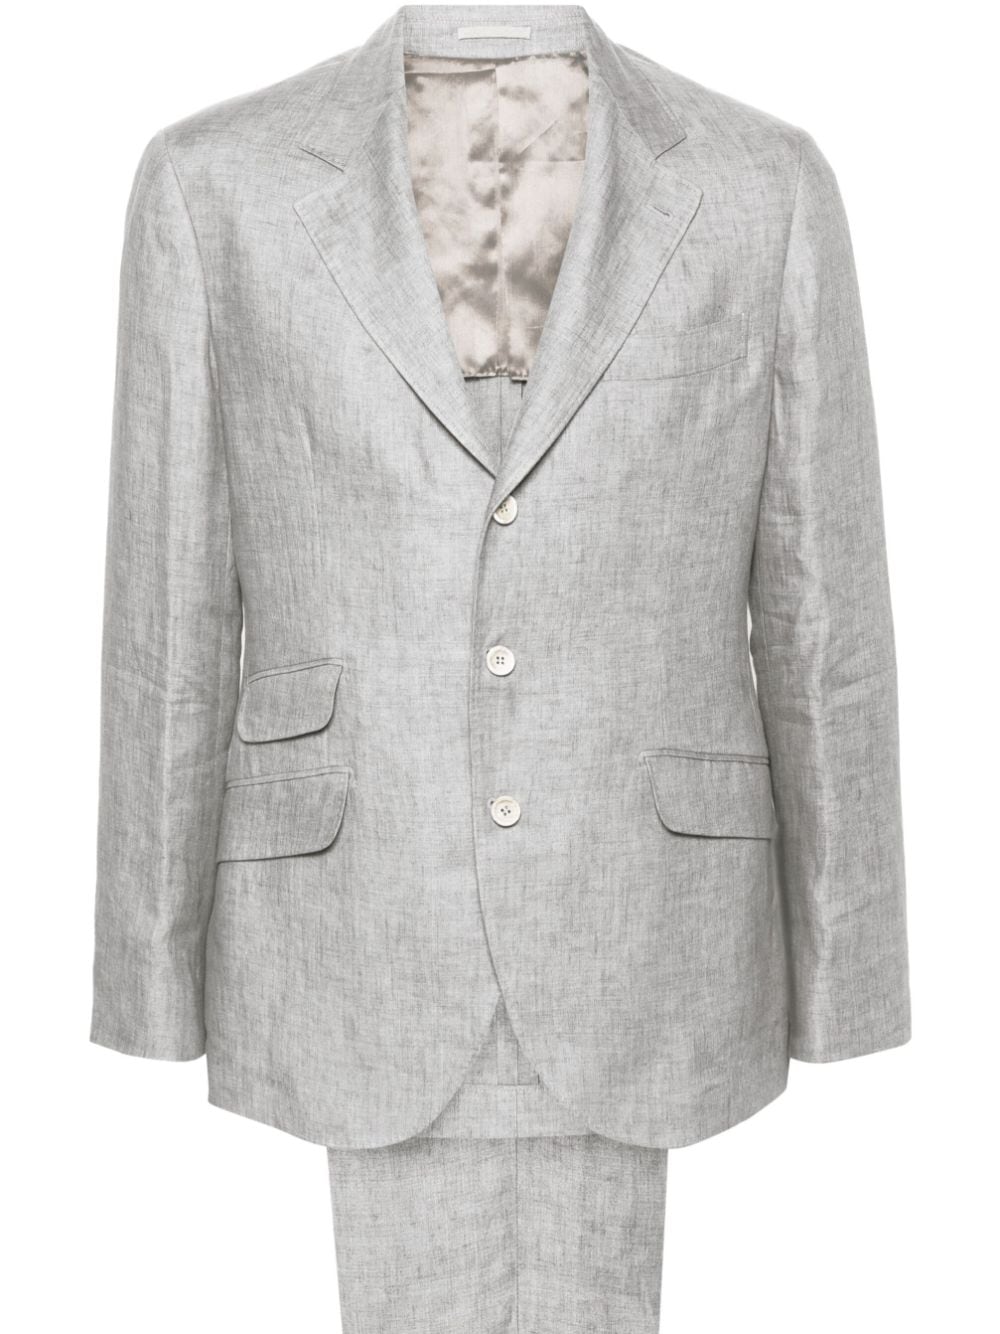 Image 1 of Brunello Cucinelli single-breasted linen suit